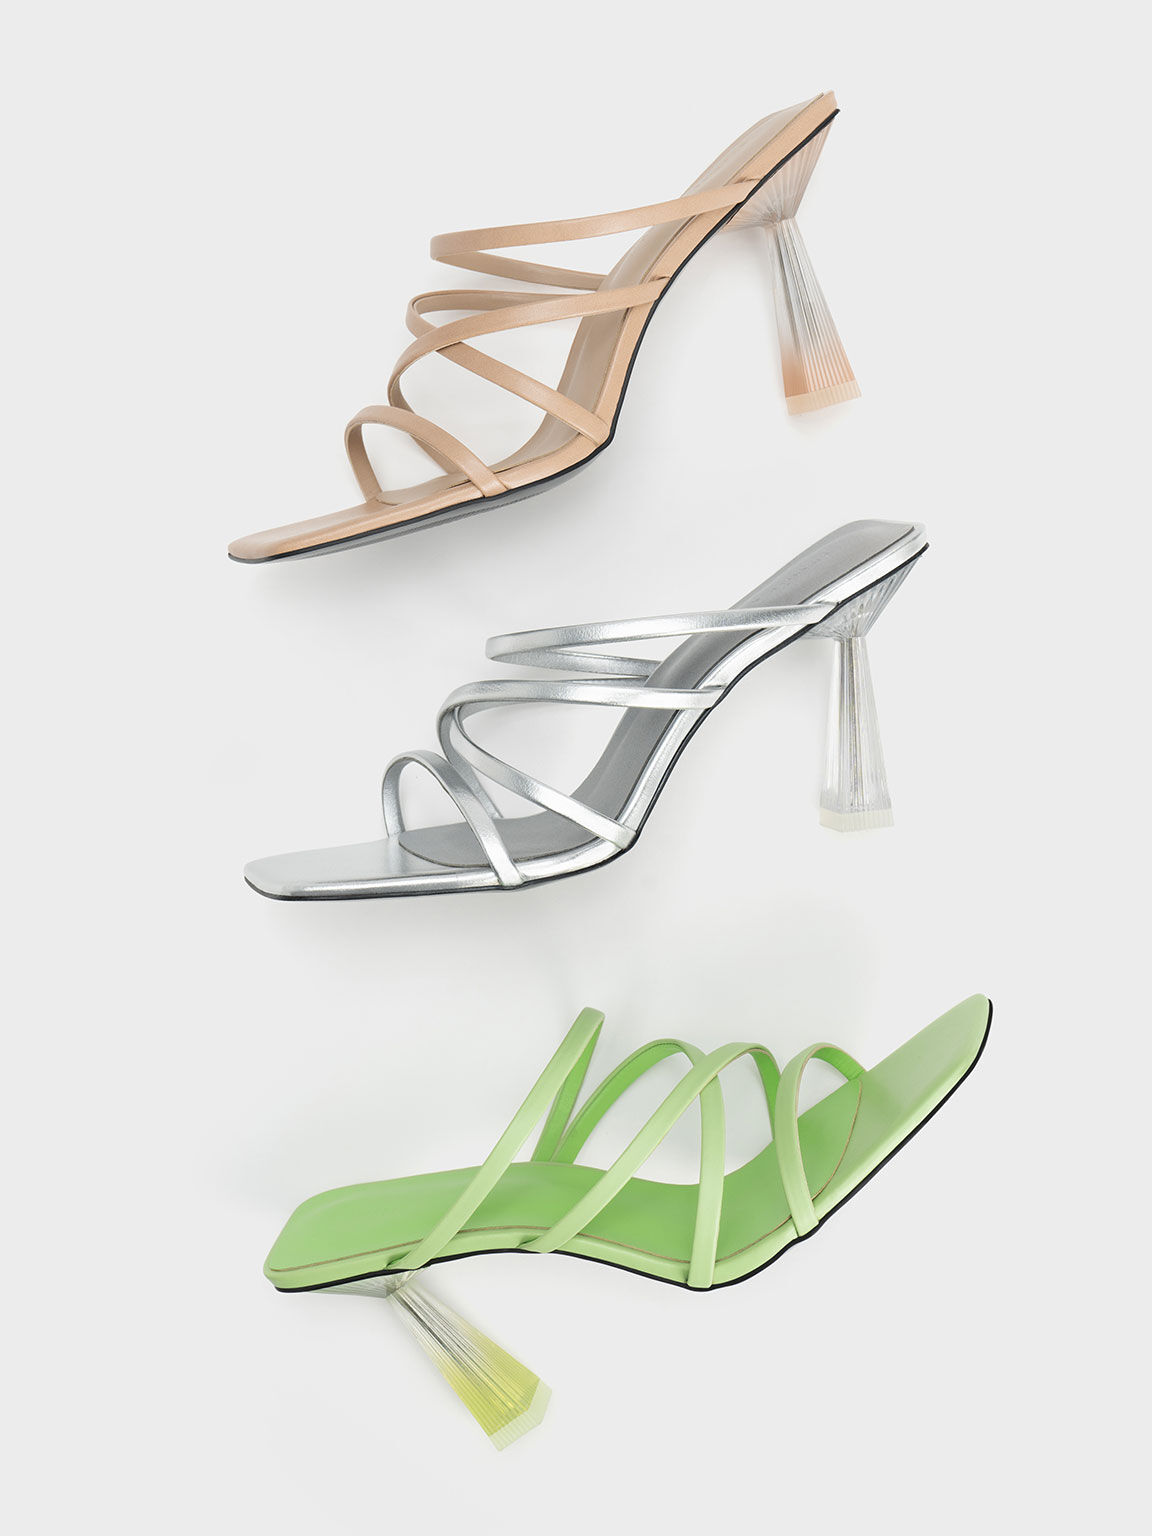 Transparent Heel Strappy Mules, Silver, hi-res